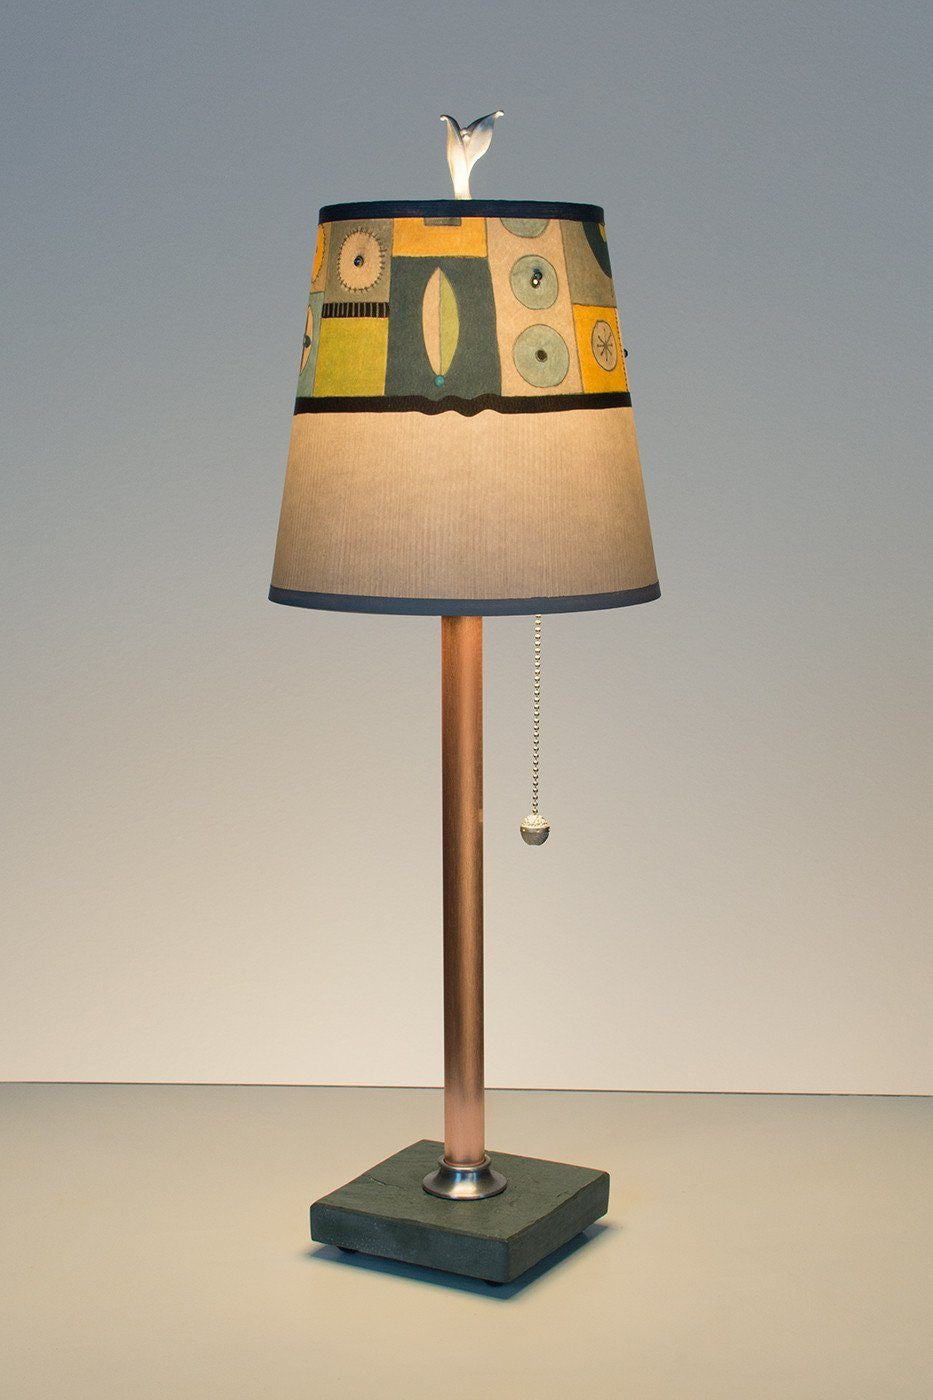 Janna Ugone & Co Table Lamps Copper Table Lamp with Small Drum Shade in Lucky Mosaic Oyster